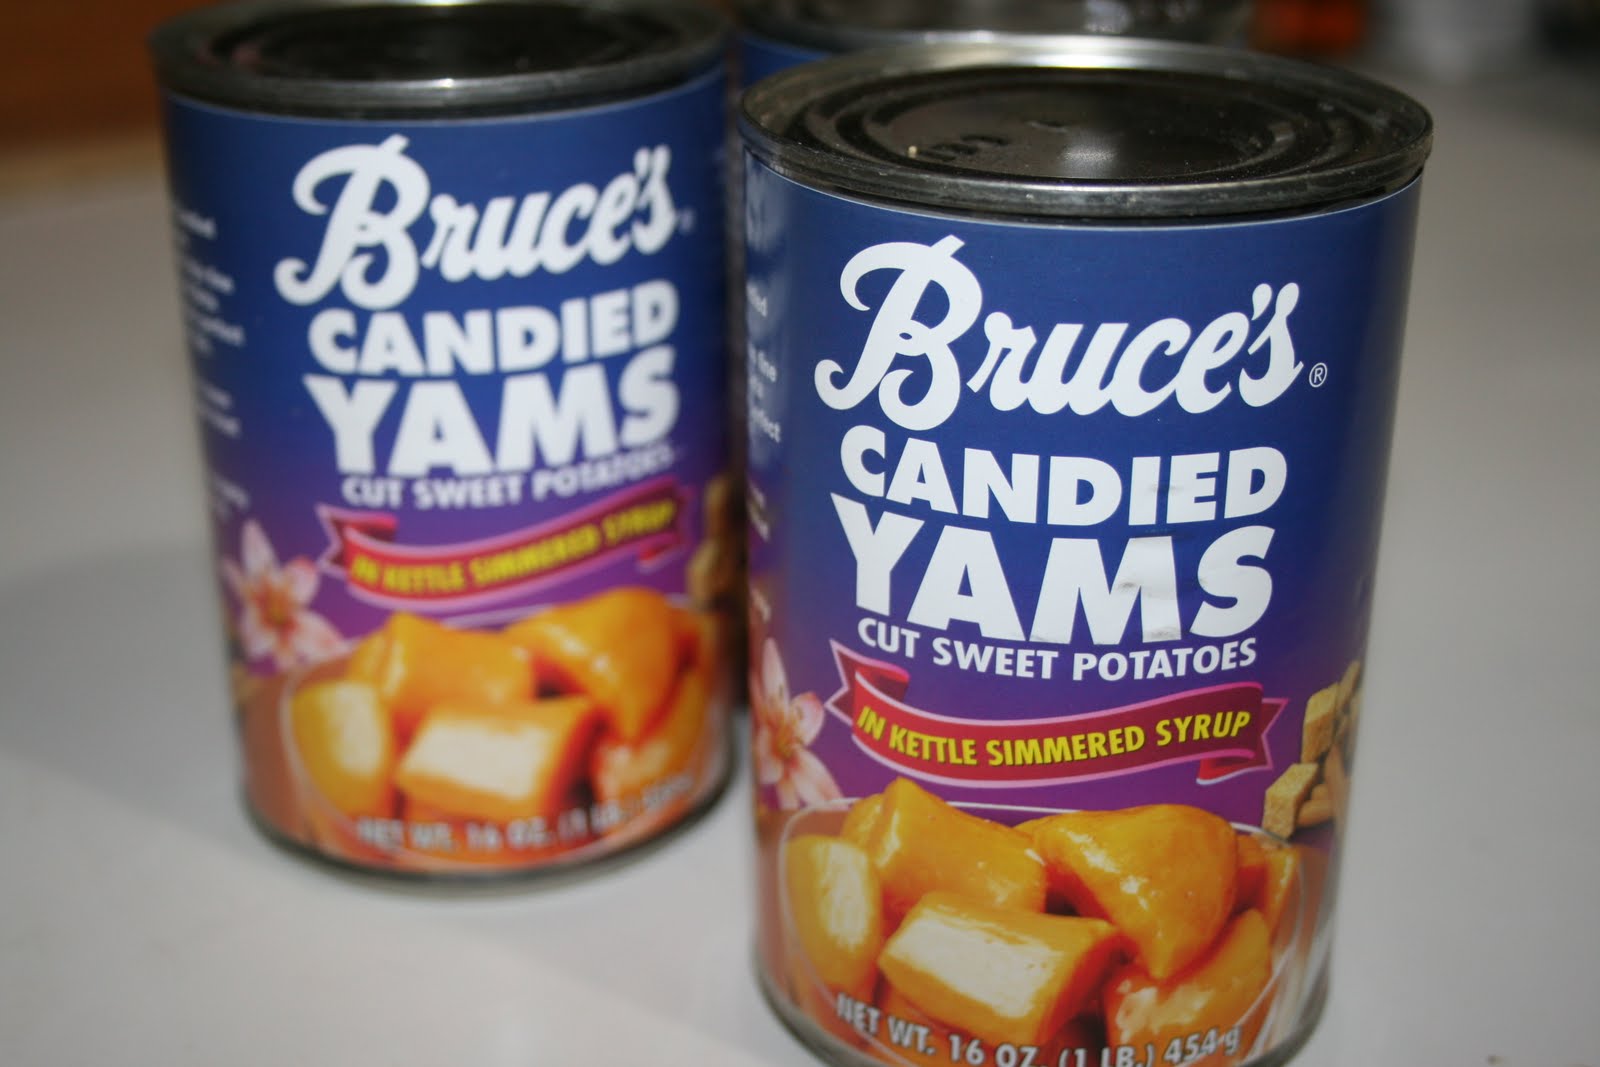 Bruce's Candied Yams Cut Sweet Potatoes in Kettle Simmered Syrup - Bruce's  Yams